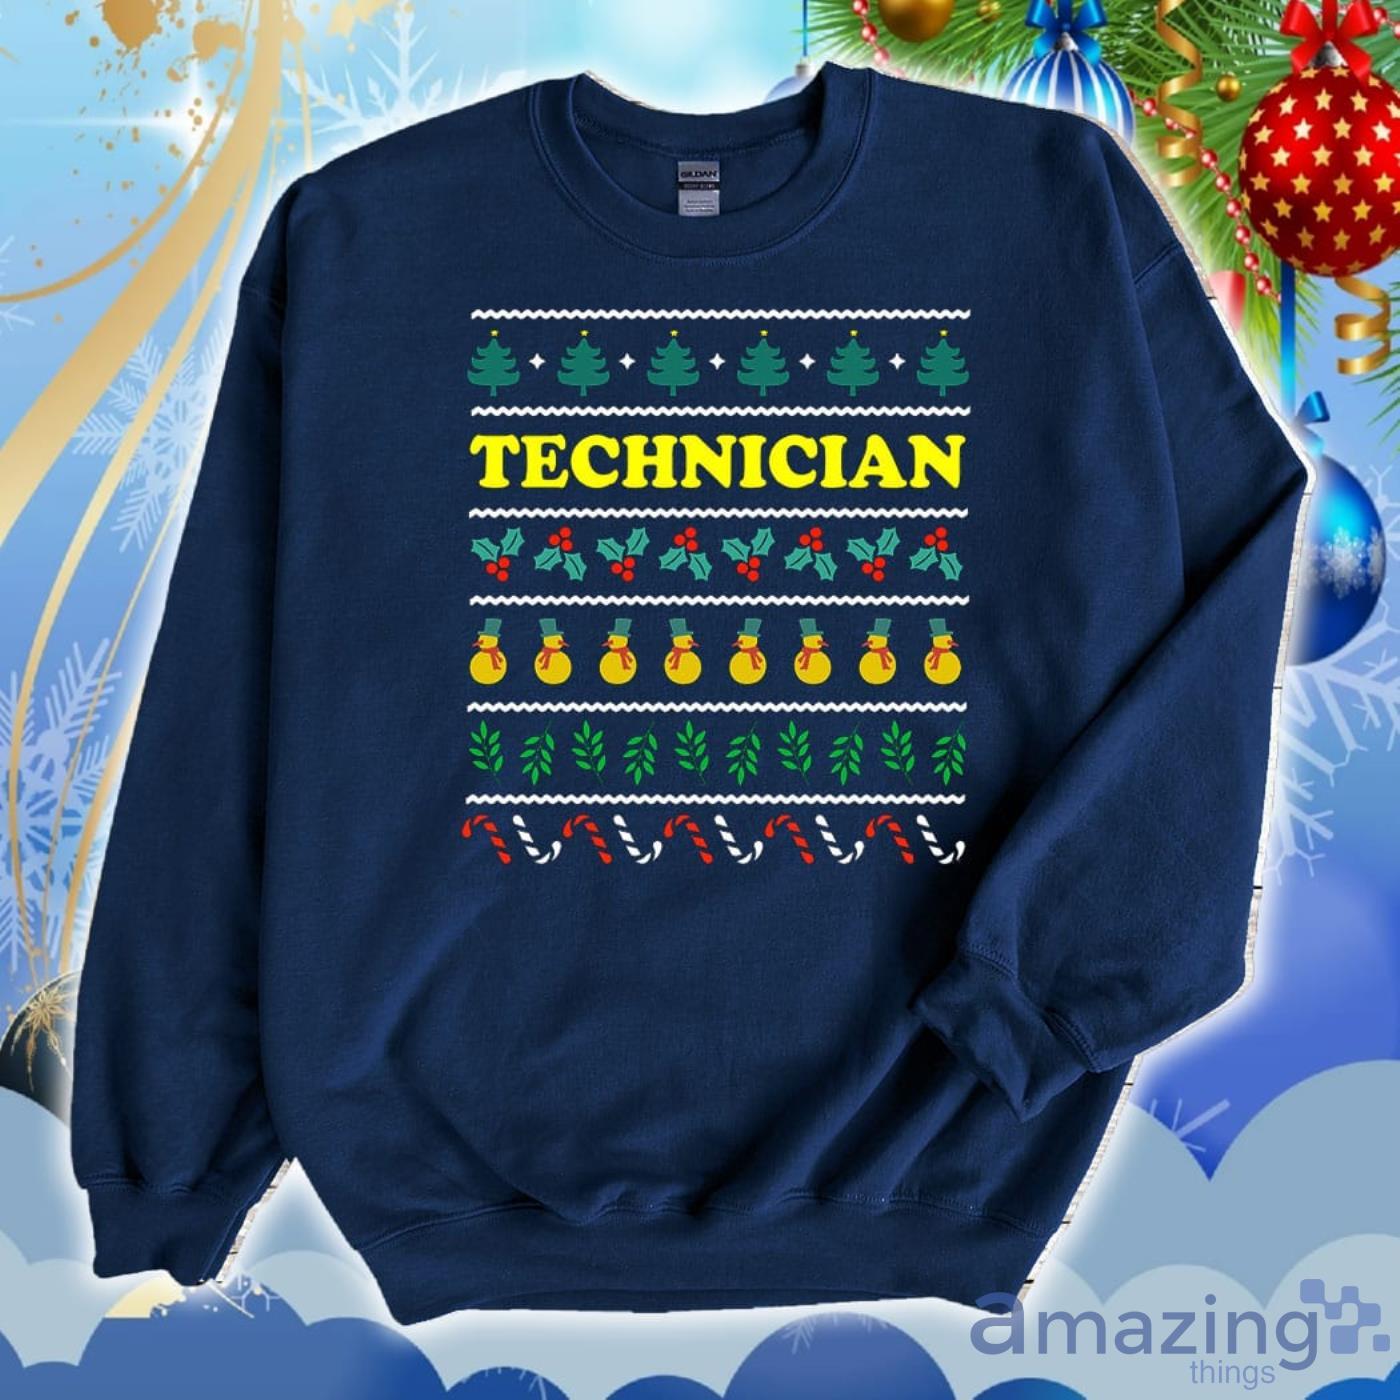 Athletic Knit - Everyone loves Ugly Christmas Sweater